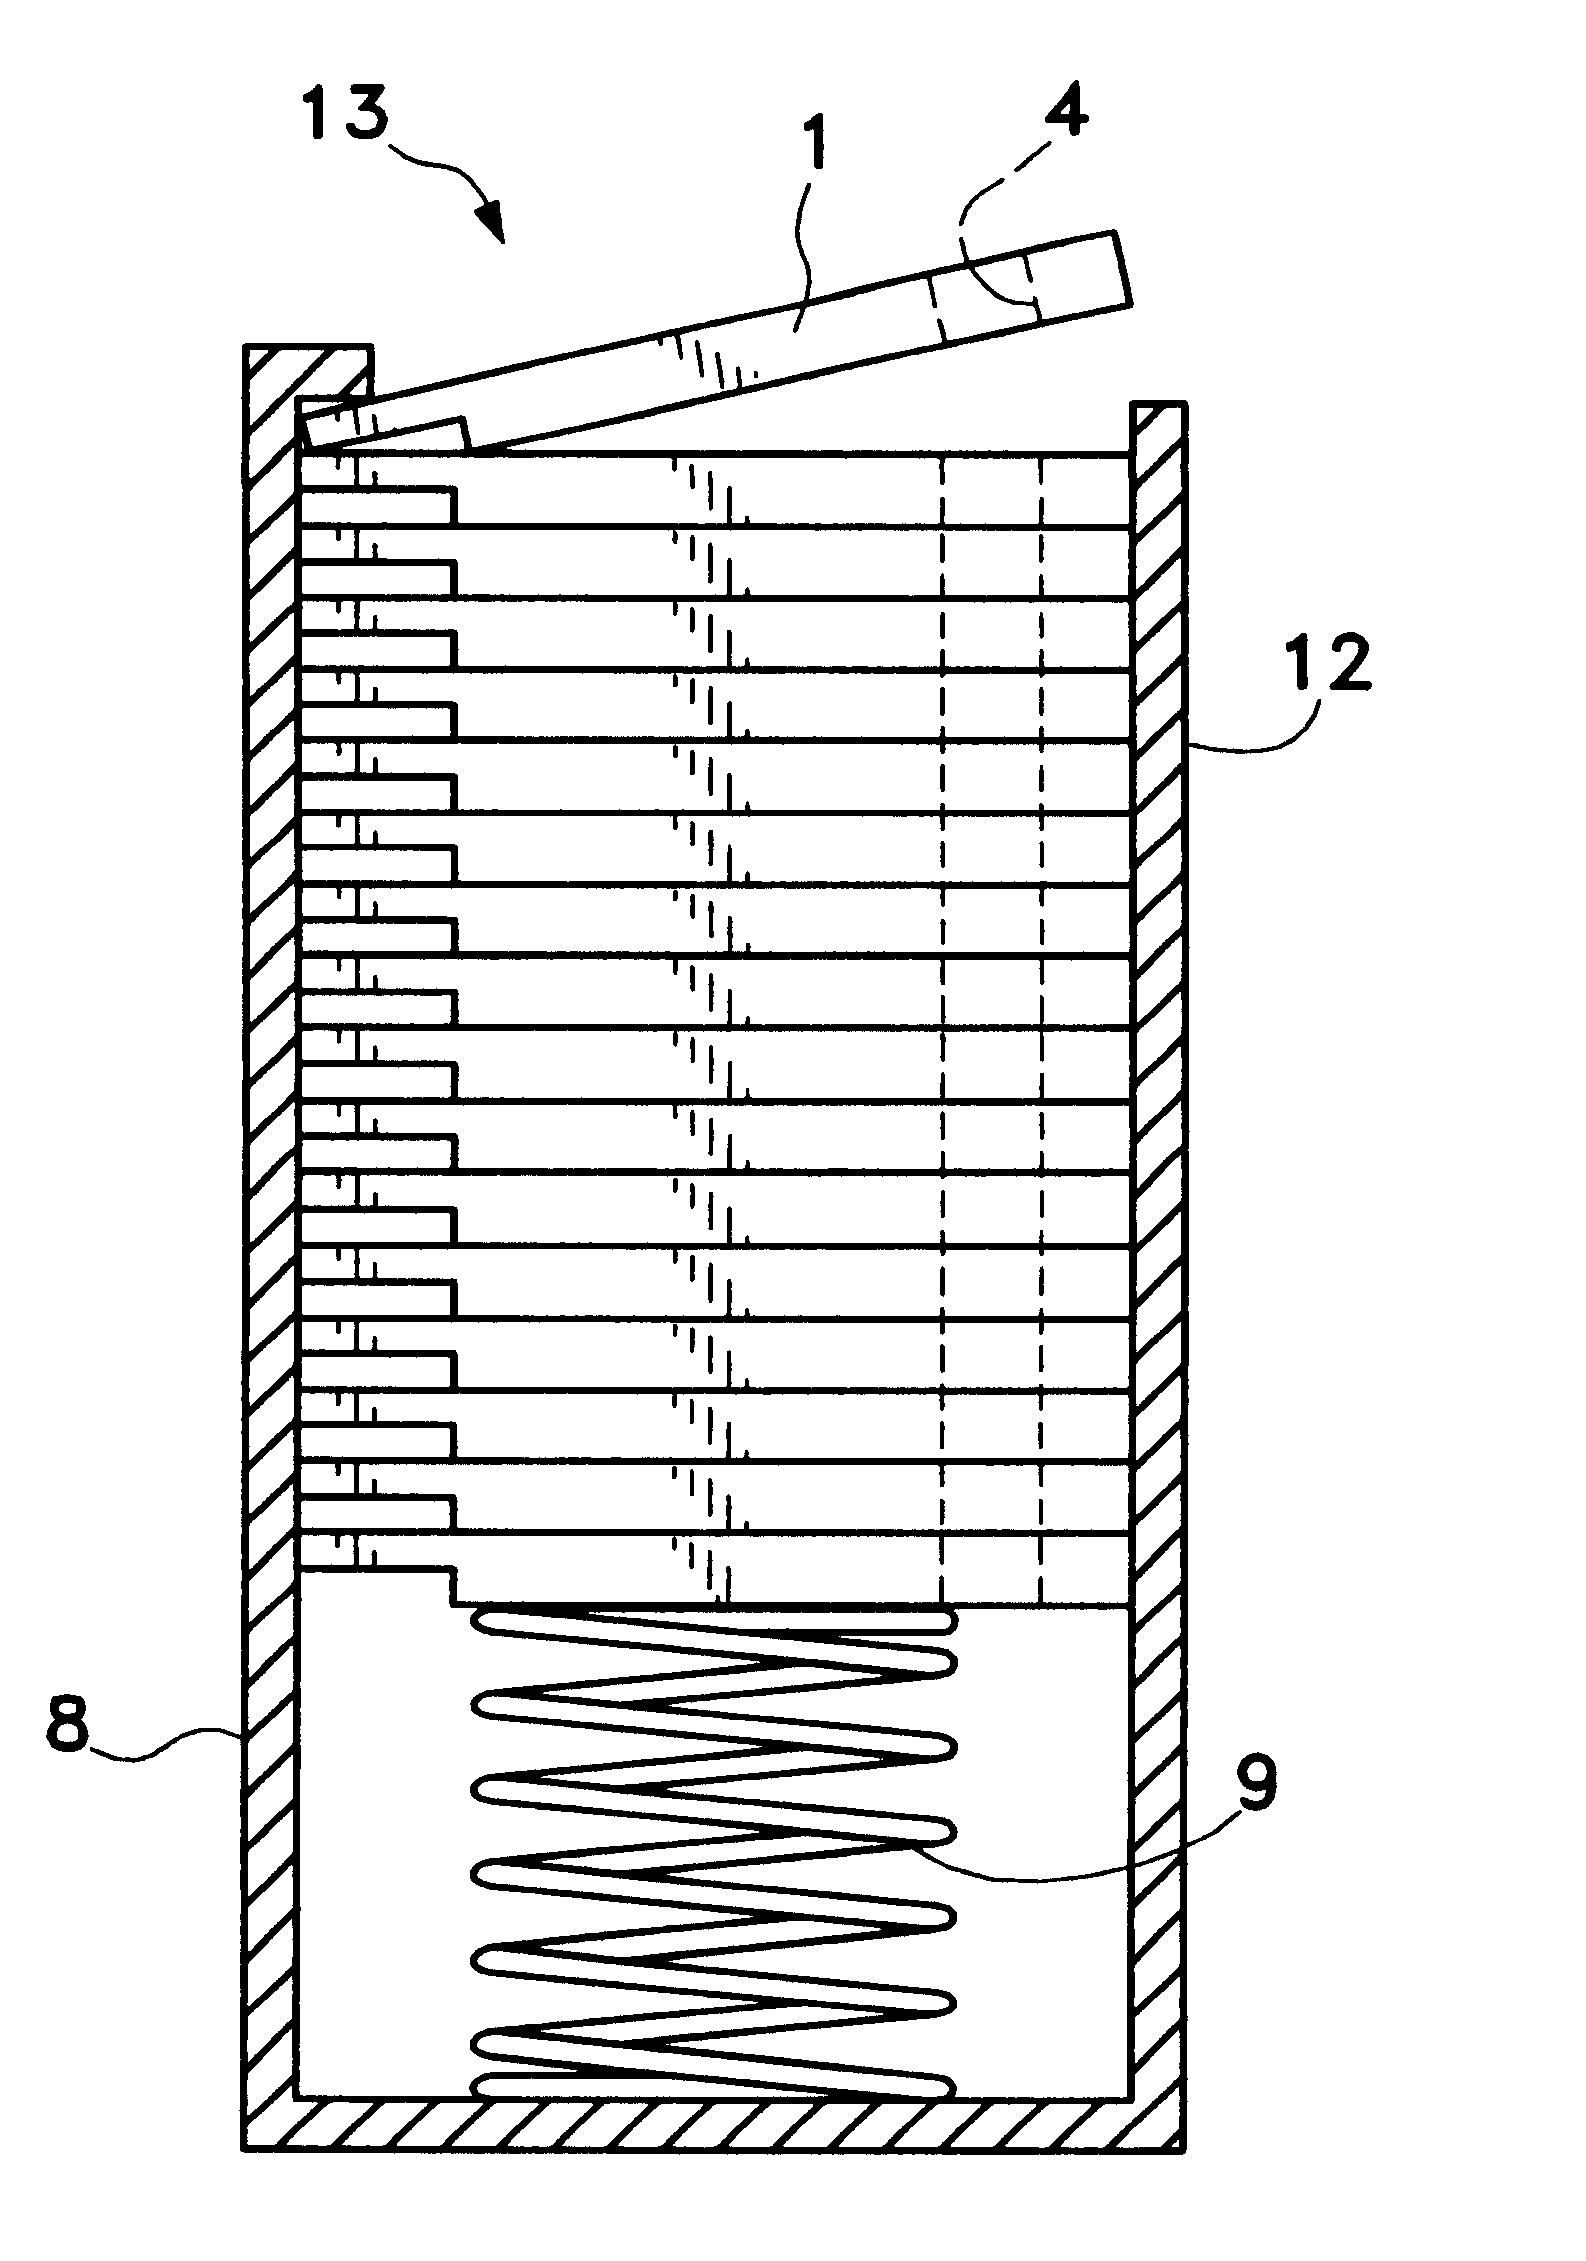 Electronic tag device